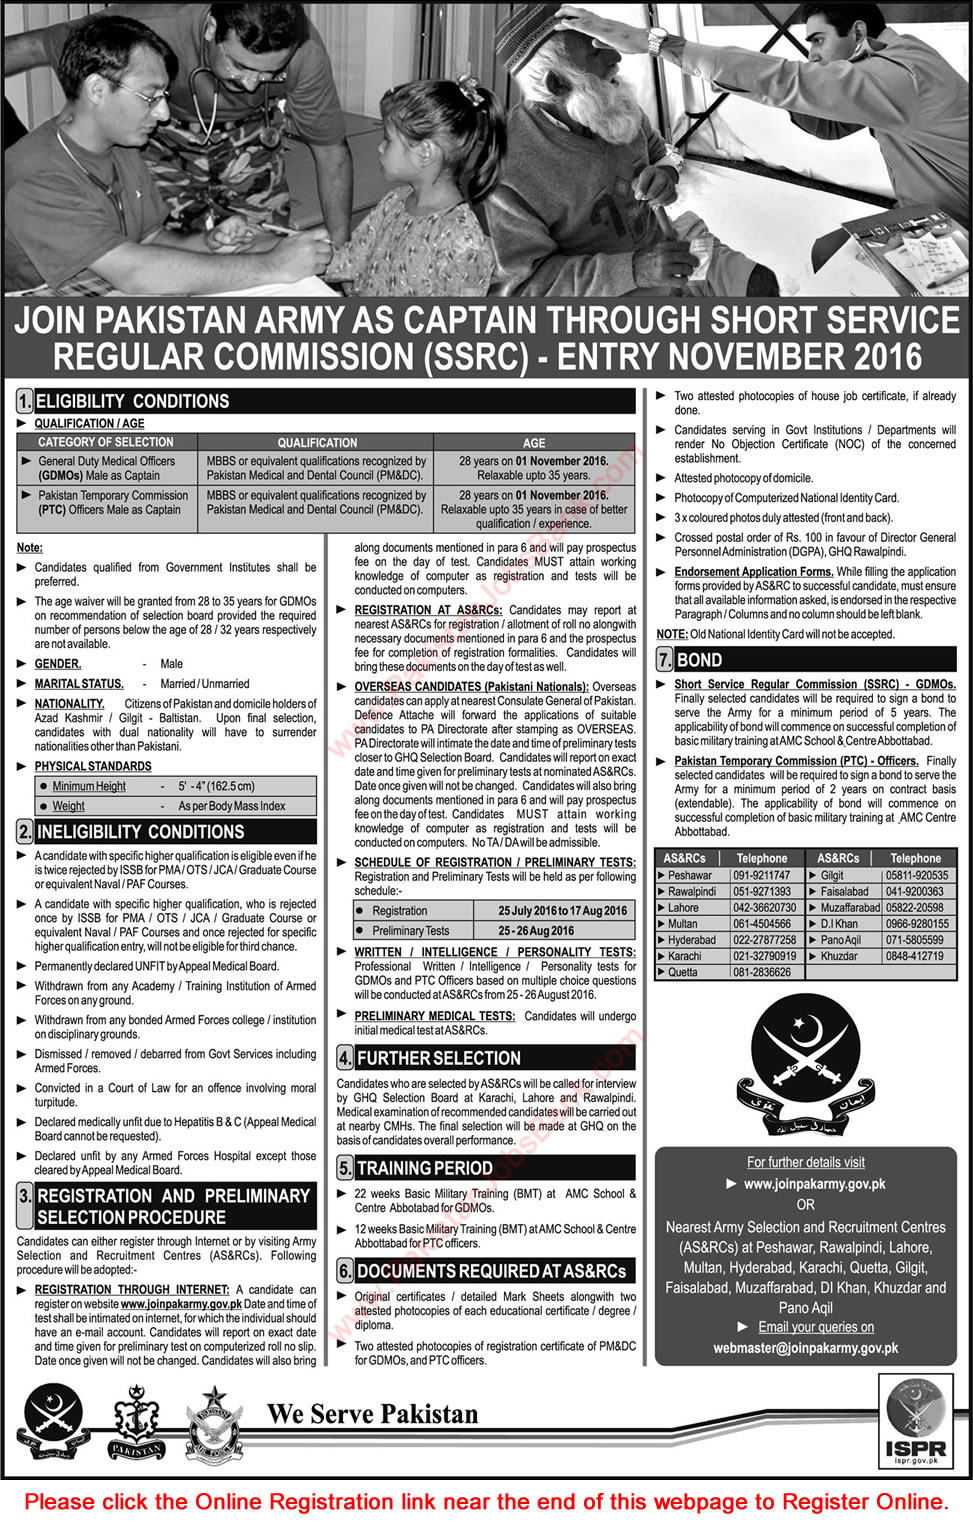 Join Pakistan Army as Captain July 2016 through Short Service Regular Commission Online Registration Latest